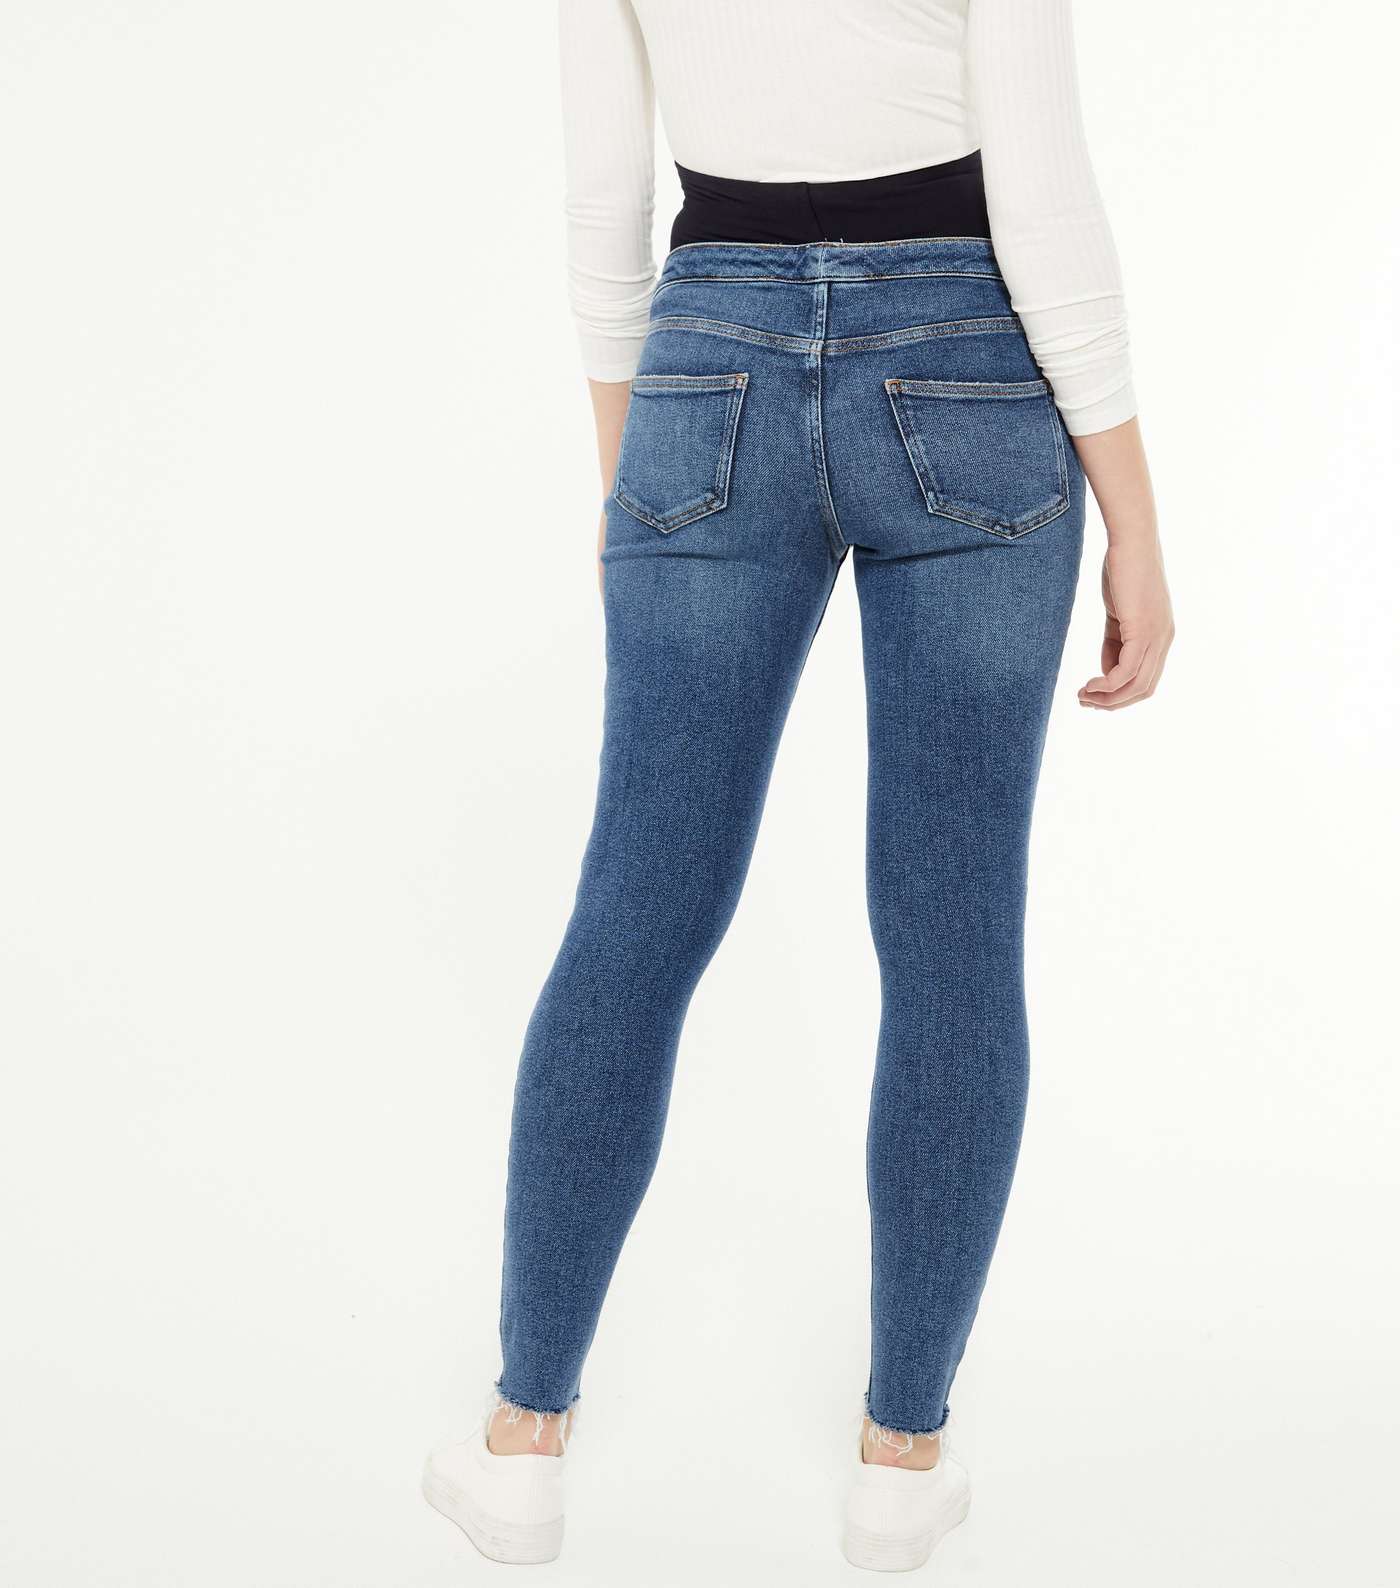 Curves Maternity Blue Ripped Over Bump Jenna Skinny Jeans Image 2